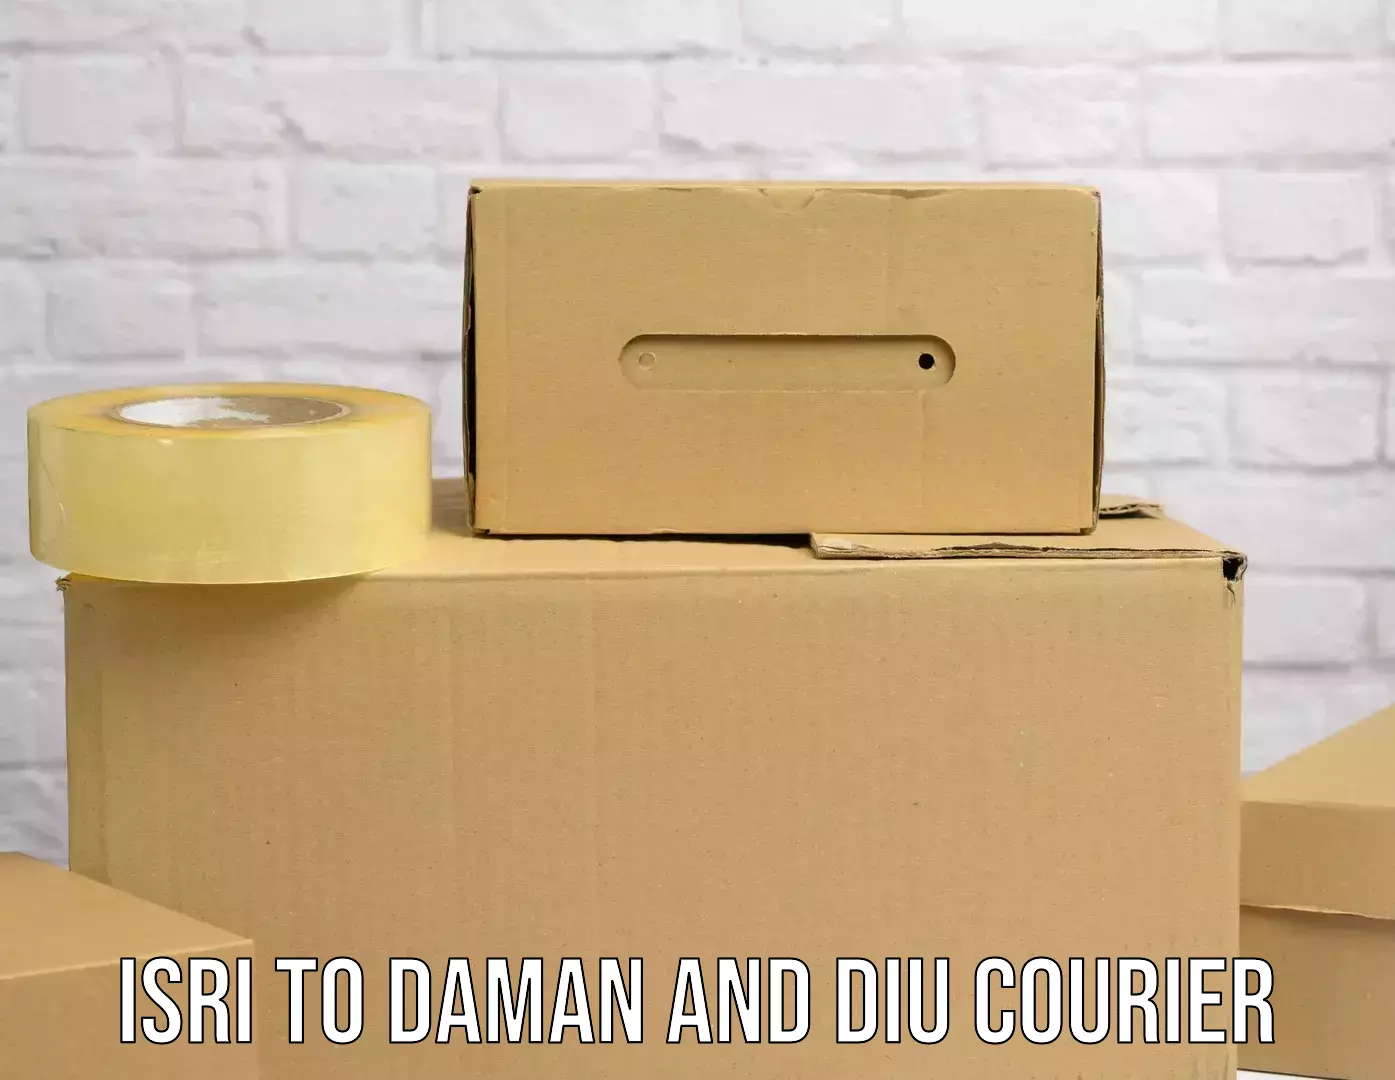 Express delivery solutions Isri to Daman and Diu